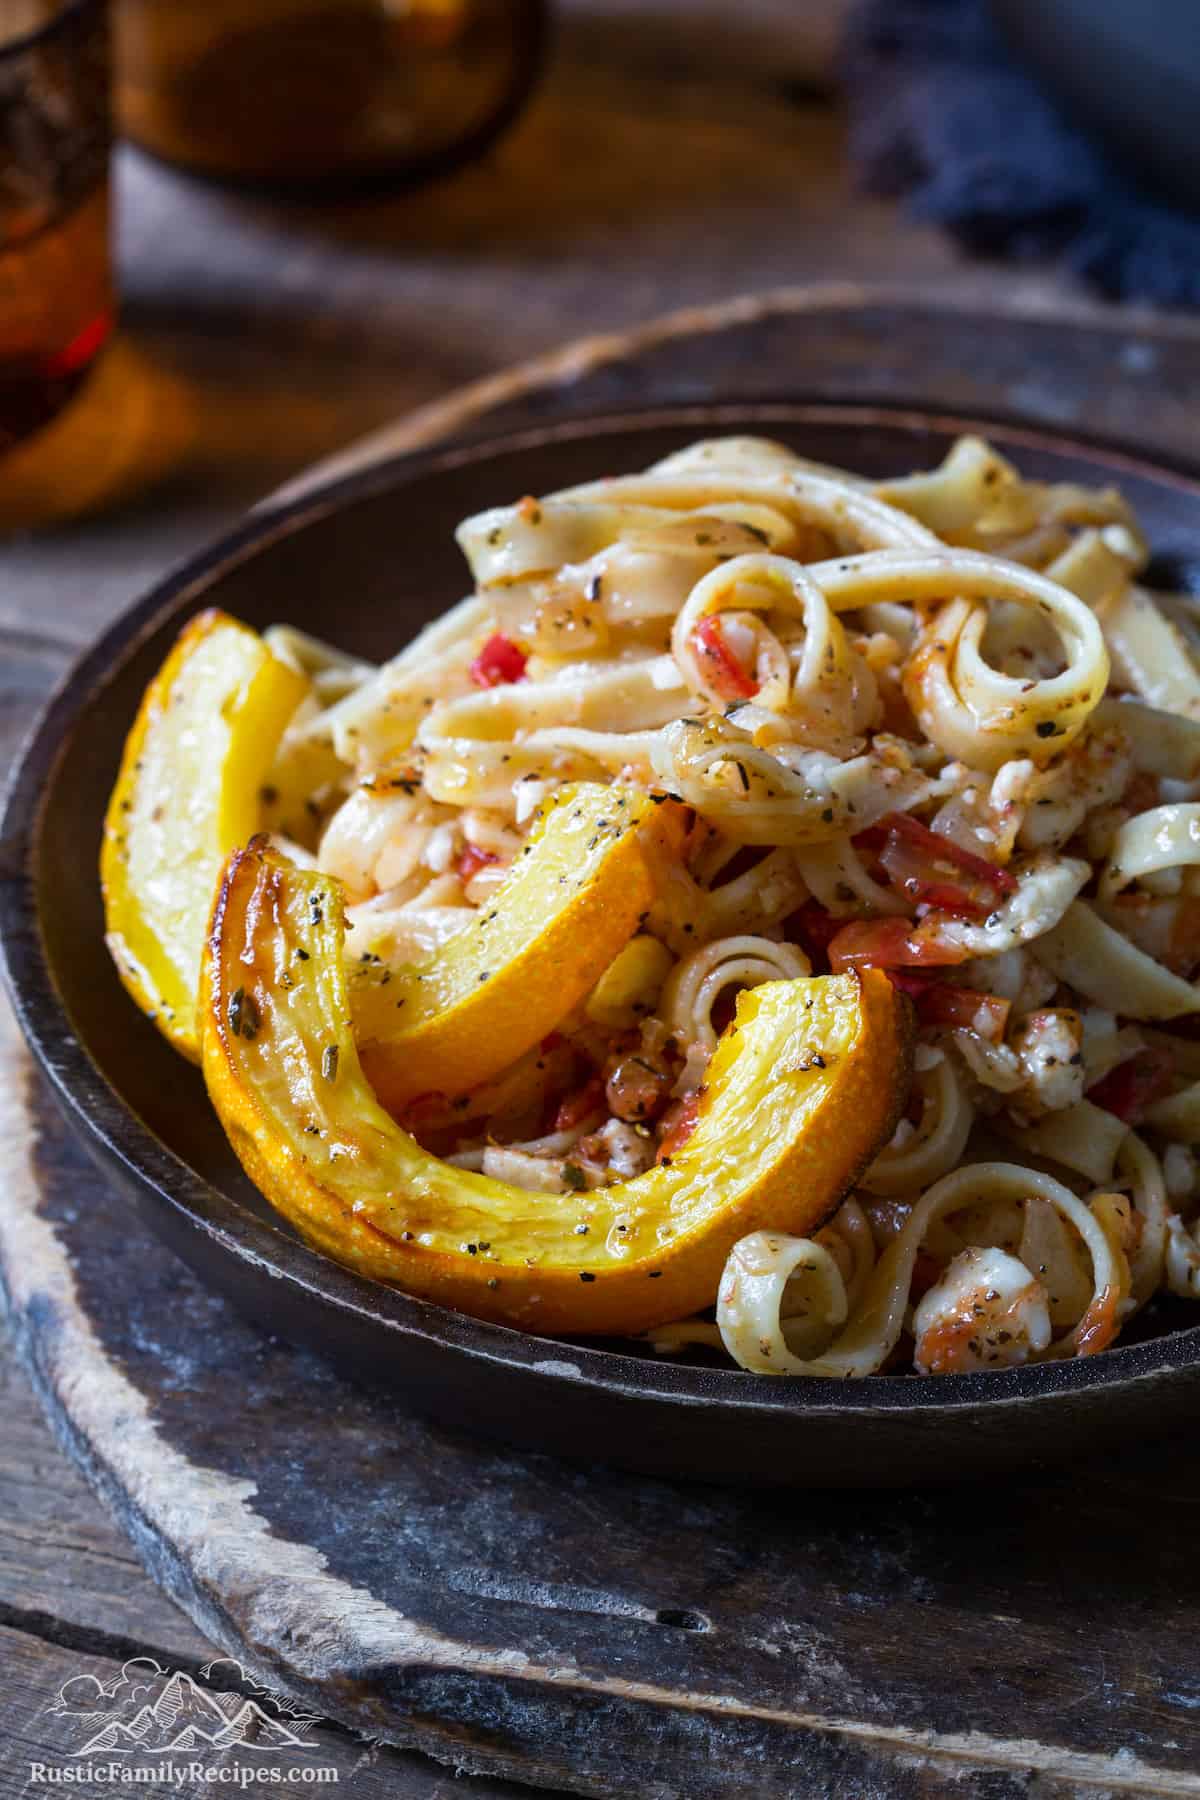 Roasted delicata squash served with goat cheese pasta